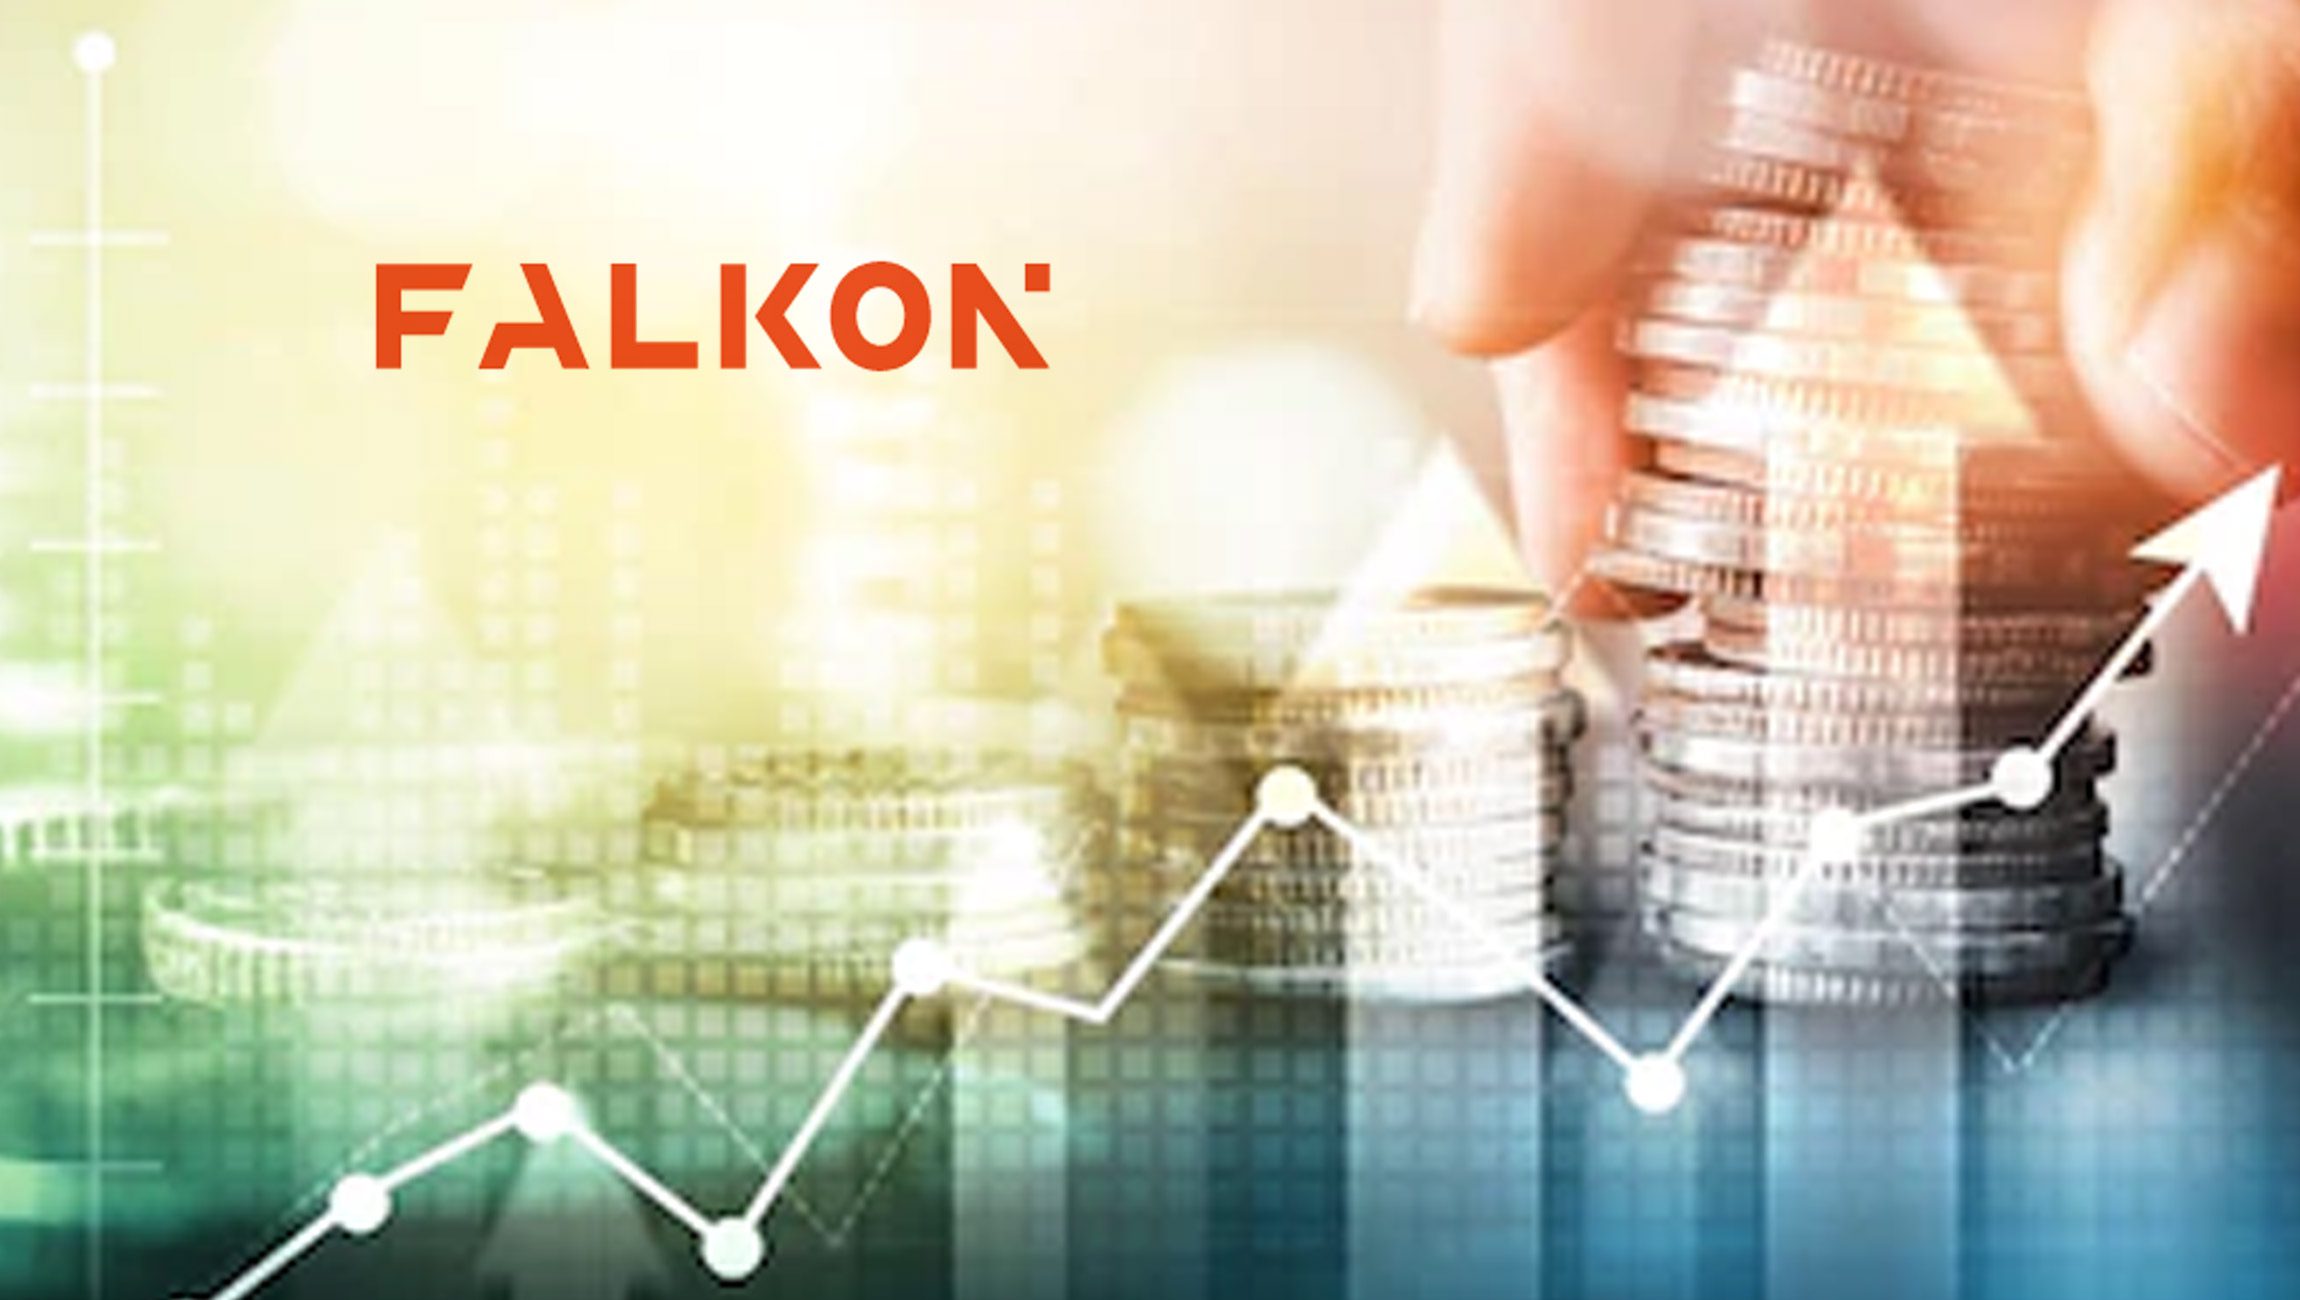 Falkon Announces $16M Financing to Help Go-To-Market Teams Win More Deals Through Operational Excellence